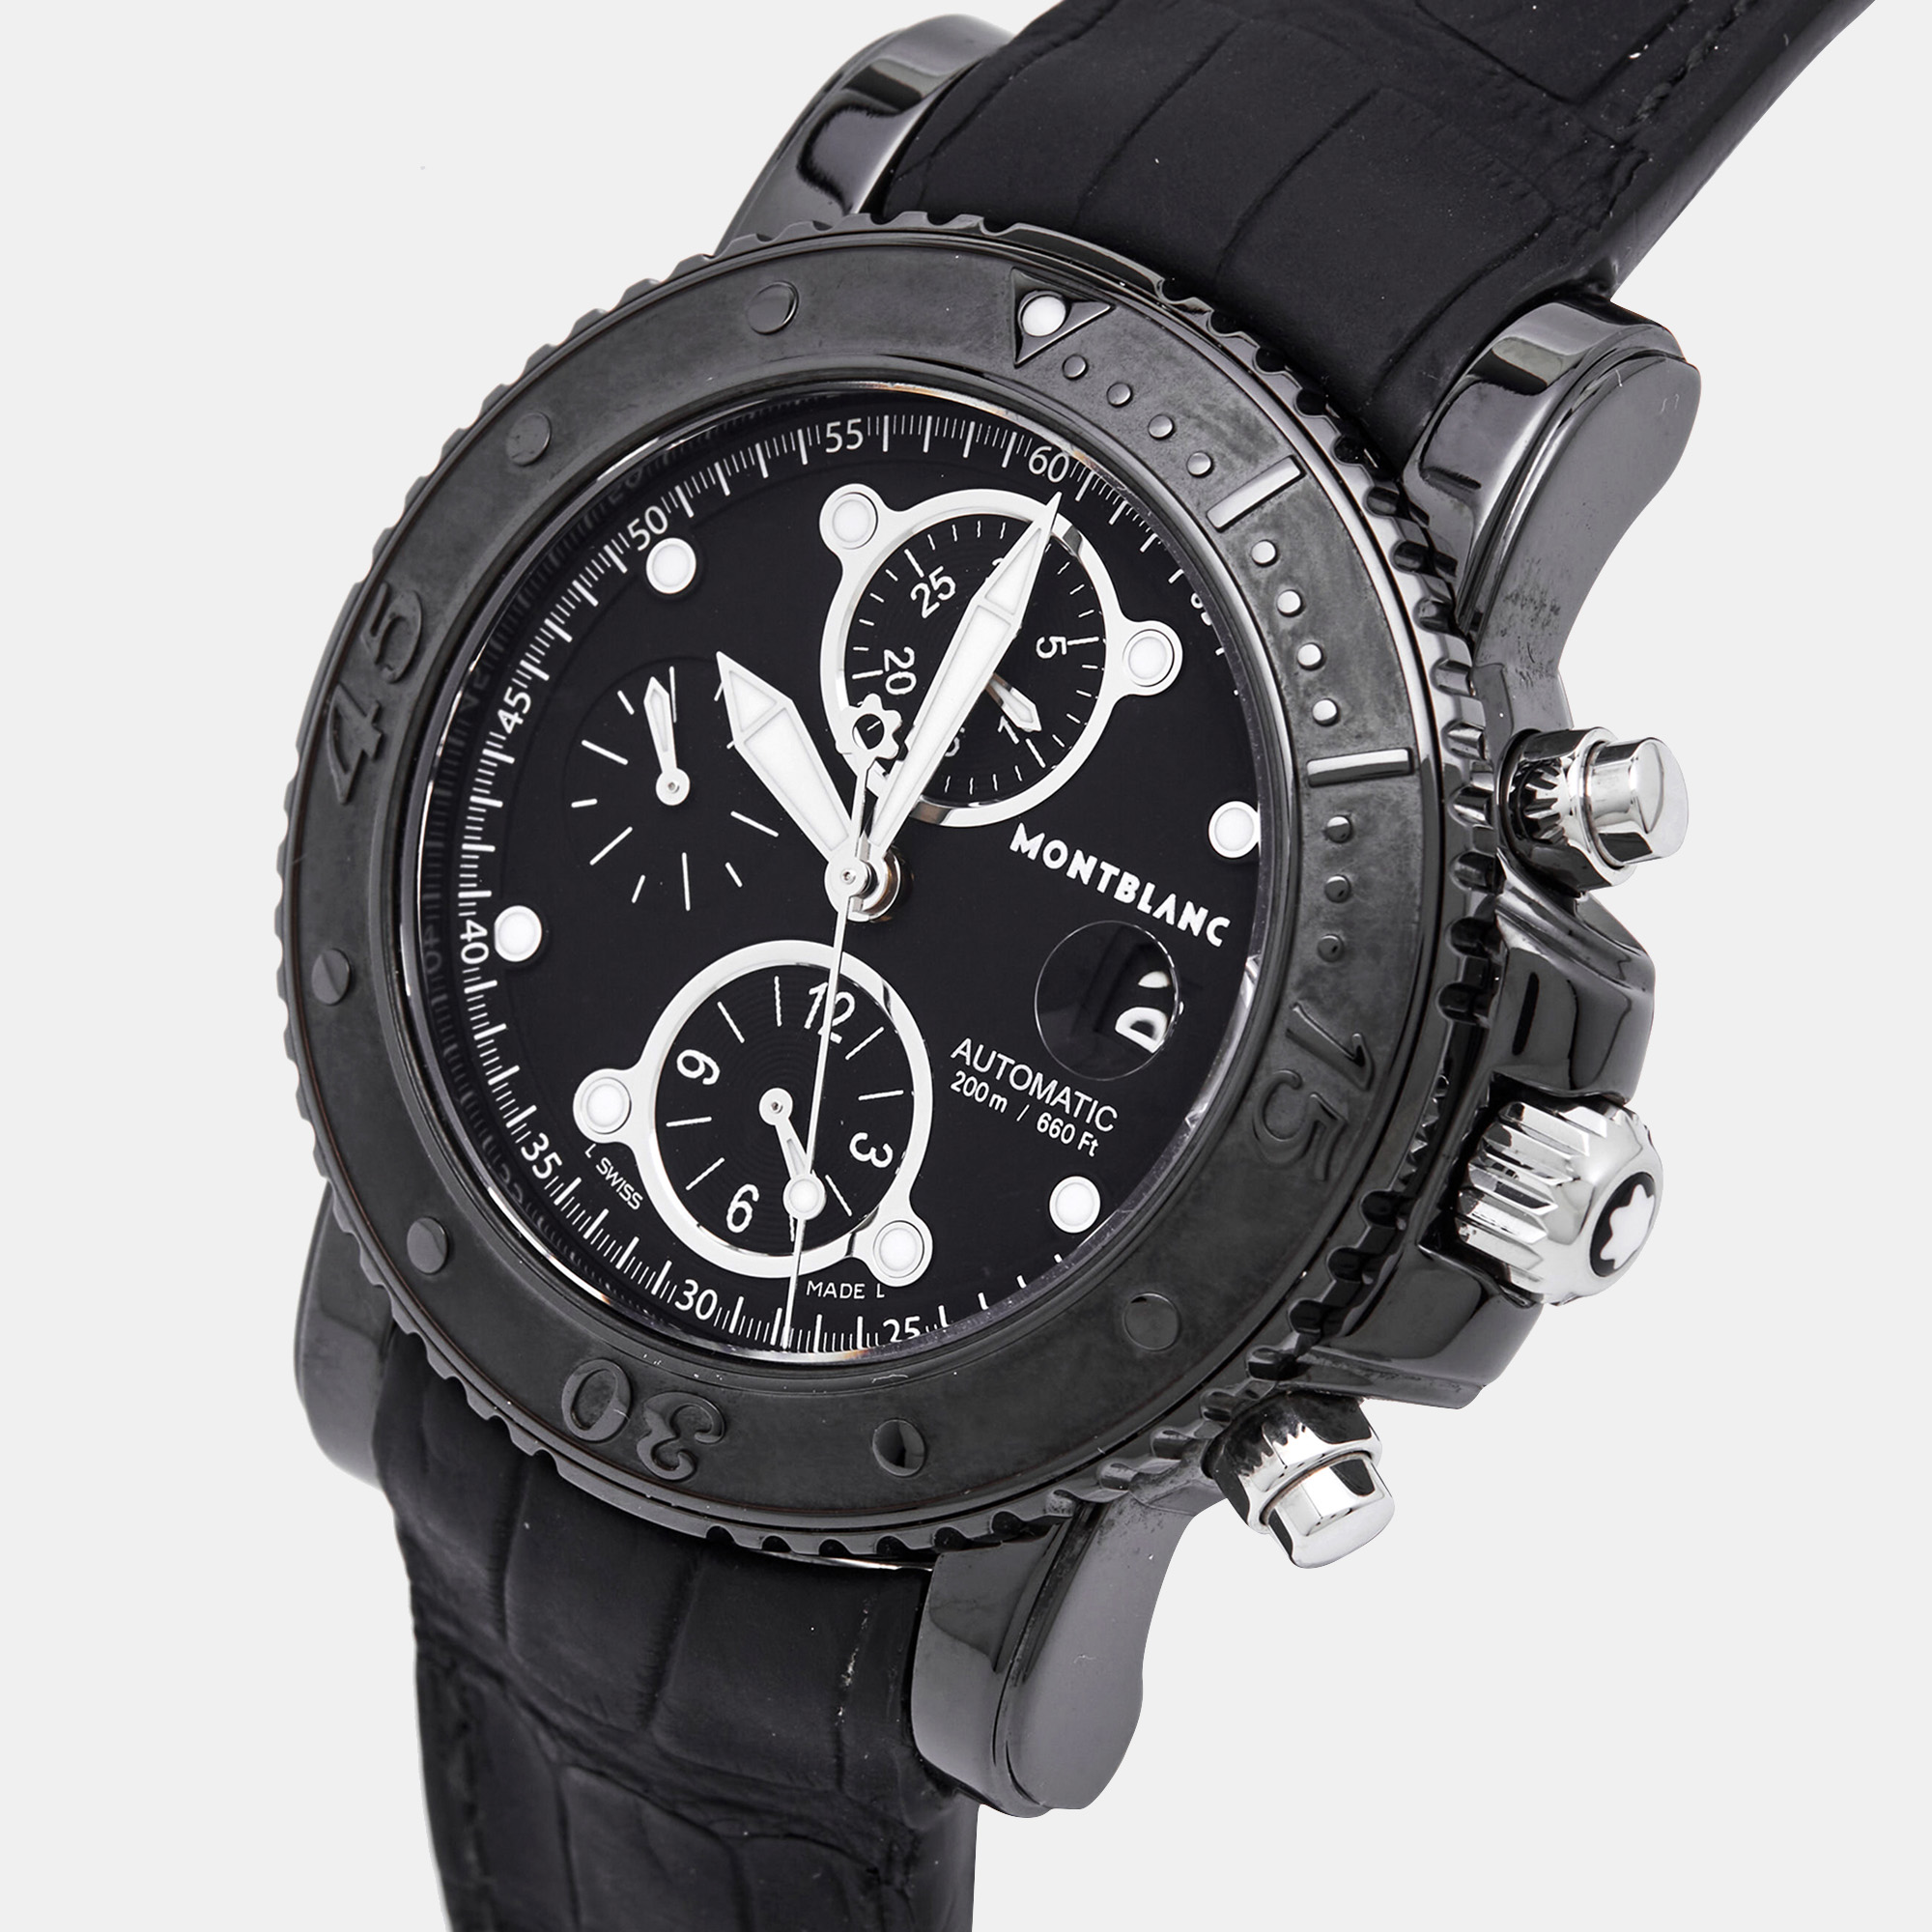 Montblanc Black PVD Coated Stainless Steel Alligator Leather Sport 104279 Men's Wristwatch 44 Mm